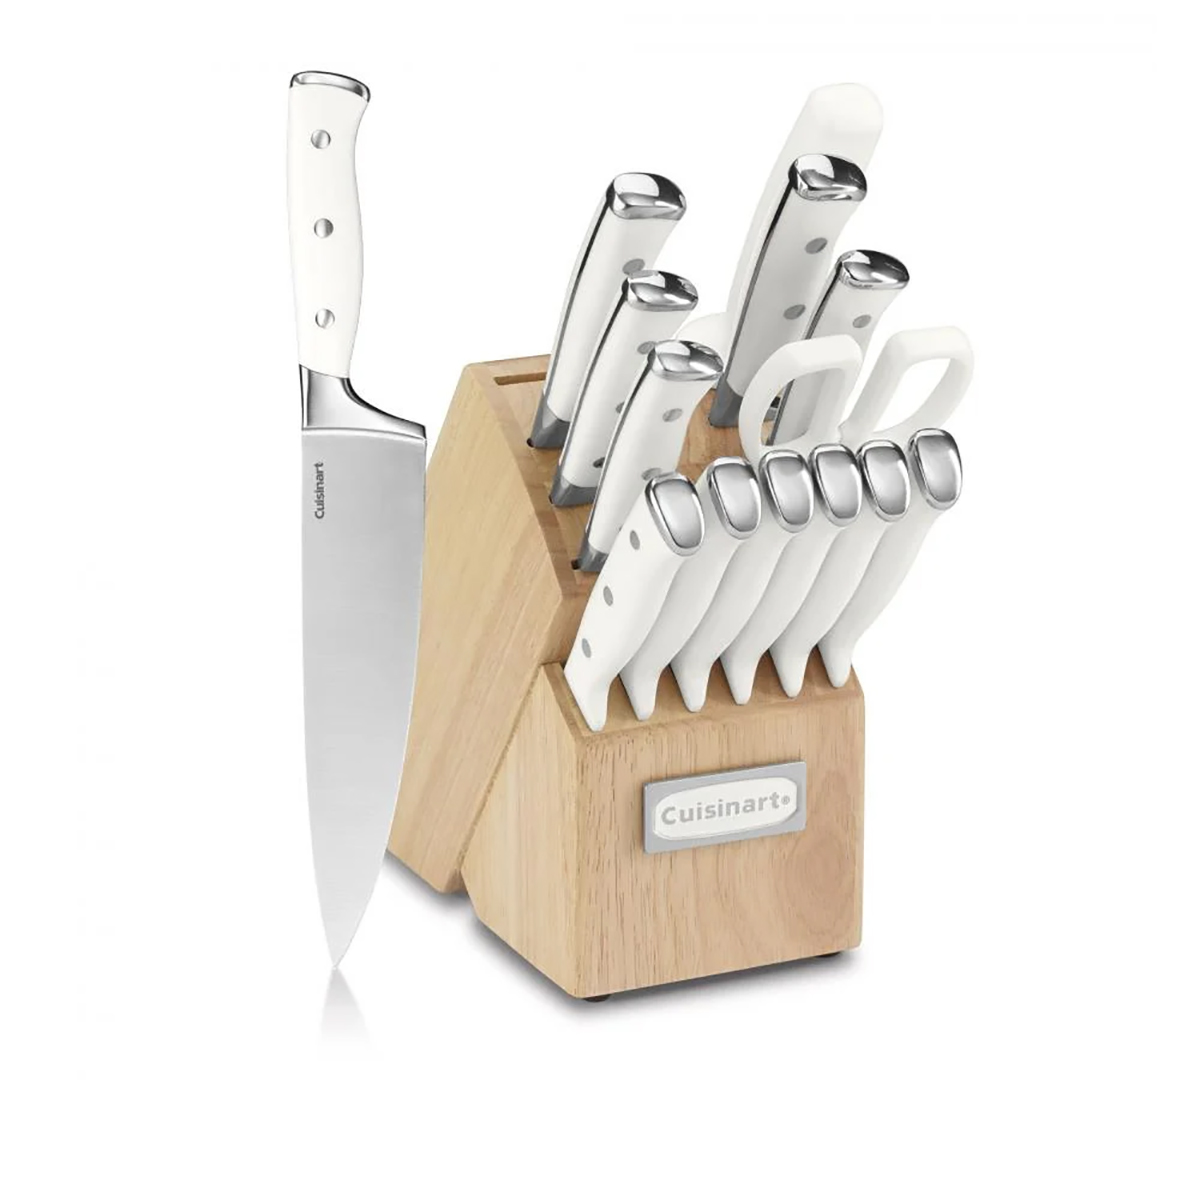 Cuisinart(R) 15pc. Stainless Steel White Cutlery Block Set